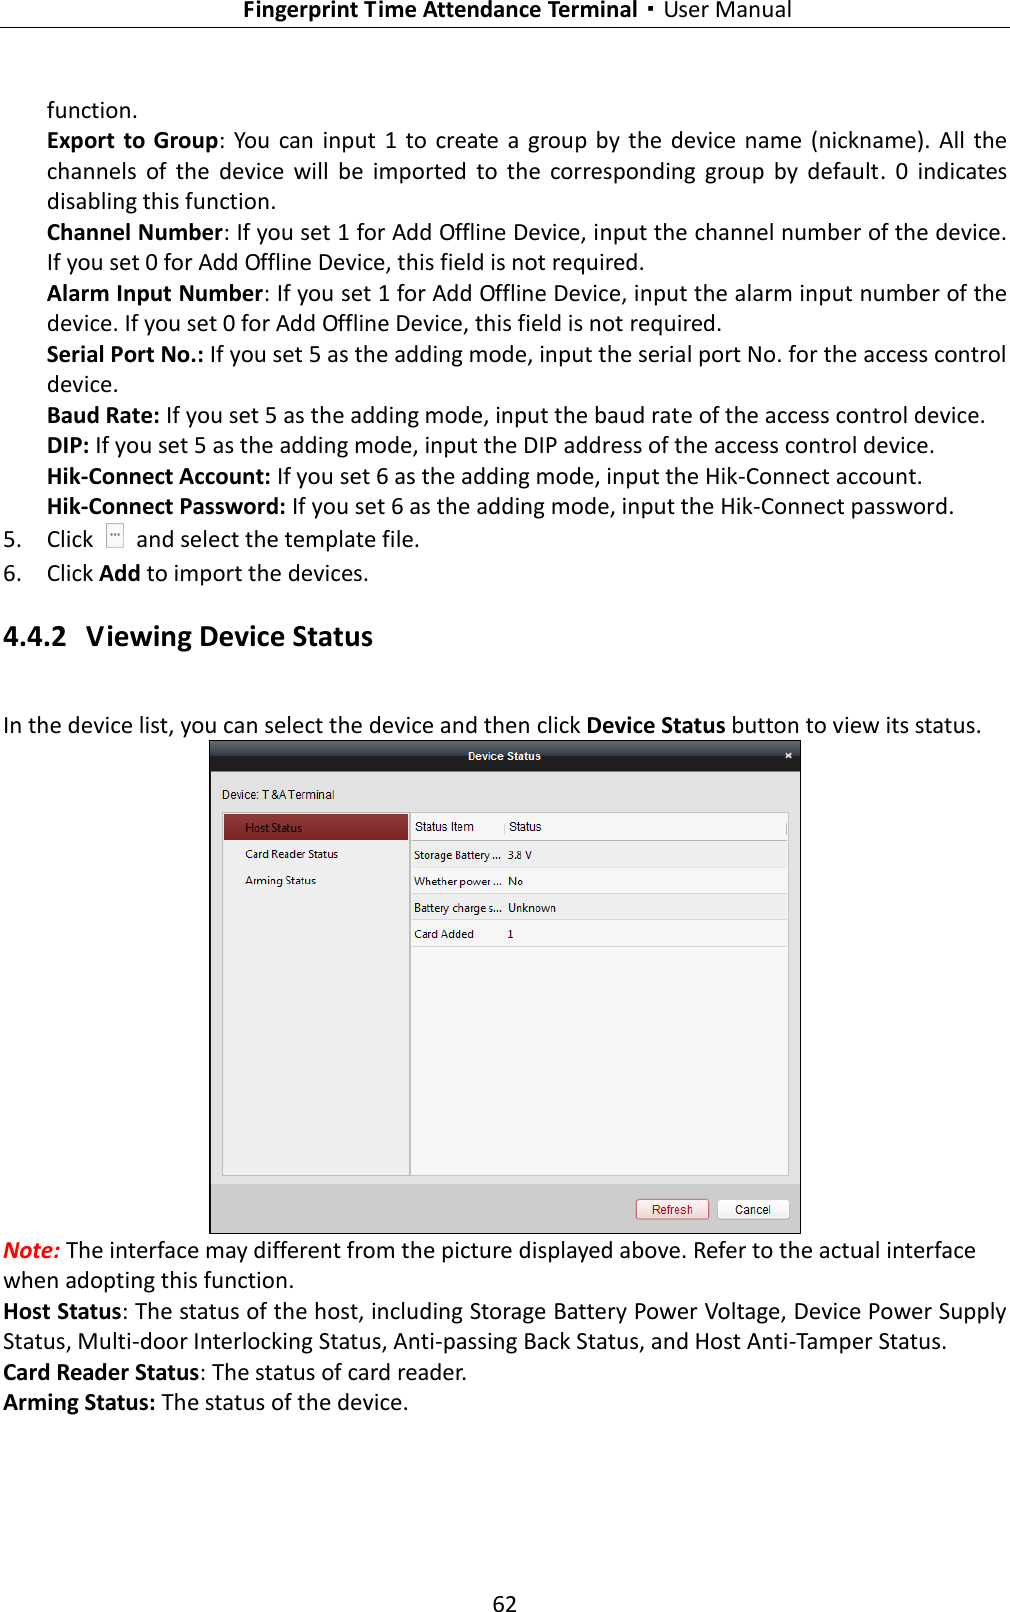   Fingerprint Time Attendance Terminal·User Manual 62  function. Export  to Group:  You  can input  1  to  create  a  group by  the  device name  (nickname).  All  the channels  of  the  device  will  be  imported  to  the  corresponding  group  by  default.  0  indicates disabling this function. Channel Number: If you set 1 for Add Offline Device, input the channel number of the device. If you set 0 for Add Offline Device, this field is not required. Alarm Input Number: If you set 1 for Add Offline Device, input the alarm input number of the device. If you set 0 for Add Offline Device, this field is not required. Serial Port No.: If you set 5 as the adding mode, input the serial port No. for the access control device. Baud Rate: If you set 5 as the adding mode, input the baud rate of the access control device. DIP: If you set 5 as the adding mode, input the DIP address of the access control device. Hik-Connect Account: If you set 6 as the adding mode, input the Hik-Connect account. Hik-Connect Password: If you set 6 as the adding mode, input the Hik-Connect password. 5. Click    and select the template file. 6. Click Add to import the devices. 4.4.2 Viewing Device Status In the device list, you can select the device and then click Device Status button to view its status.    Note: The interface may different from the picture displayed above. Refer to the actual interface when adopting this function. Host Status: The status of the host, including Storage Battery Power Voltage, Device Power Supply Status, Multi-door Interlocking Status, Anti-passing Back Status, and Host Anti-Tamper Status.   Card Reader Status: The status of card reader.   Arming Status: The status of the device. 